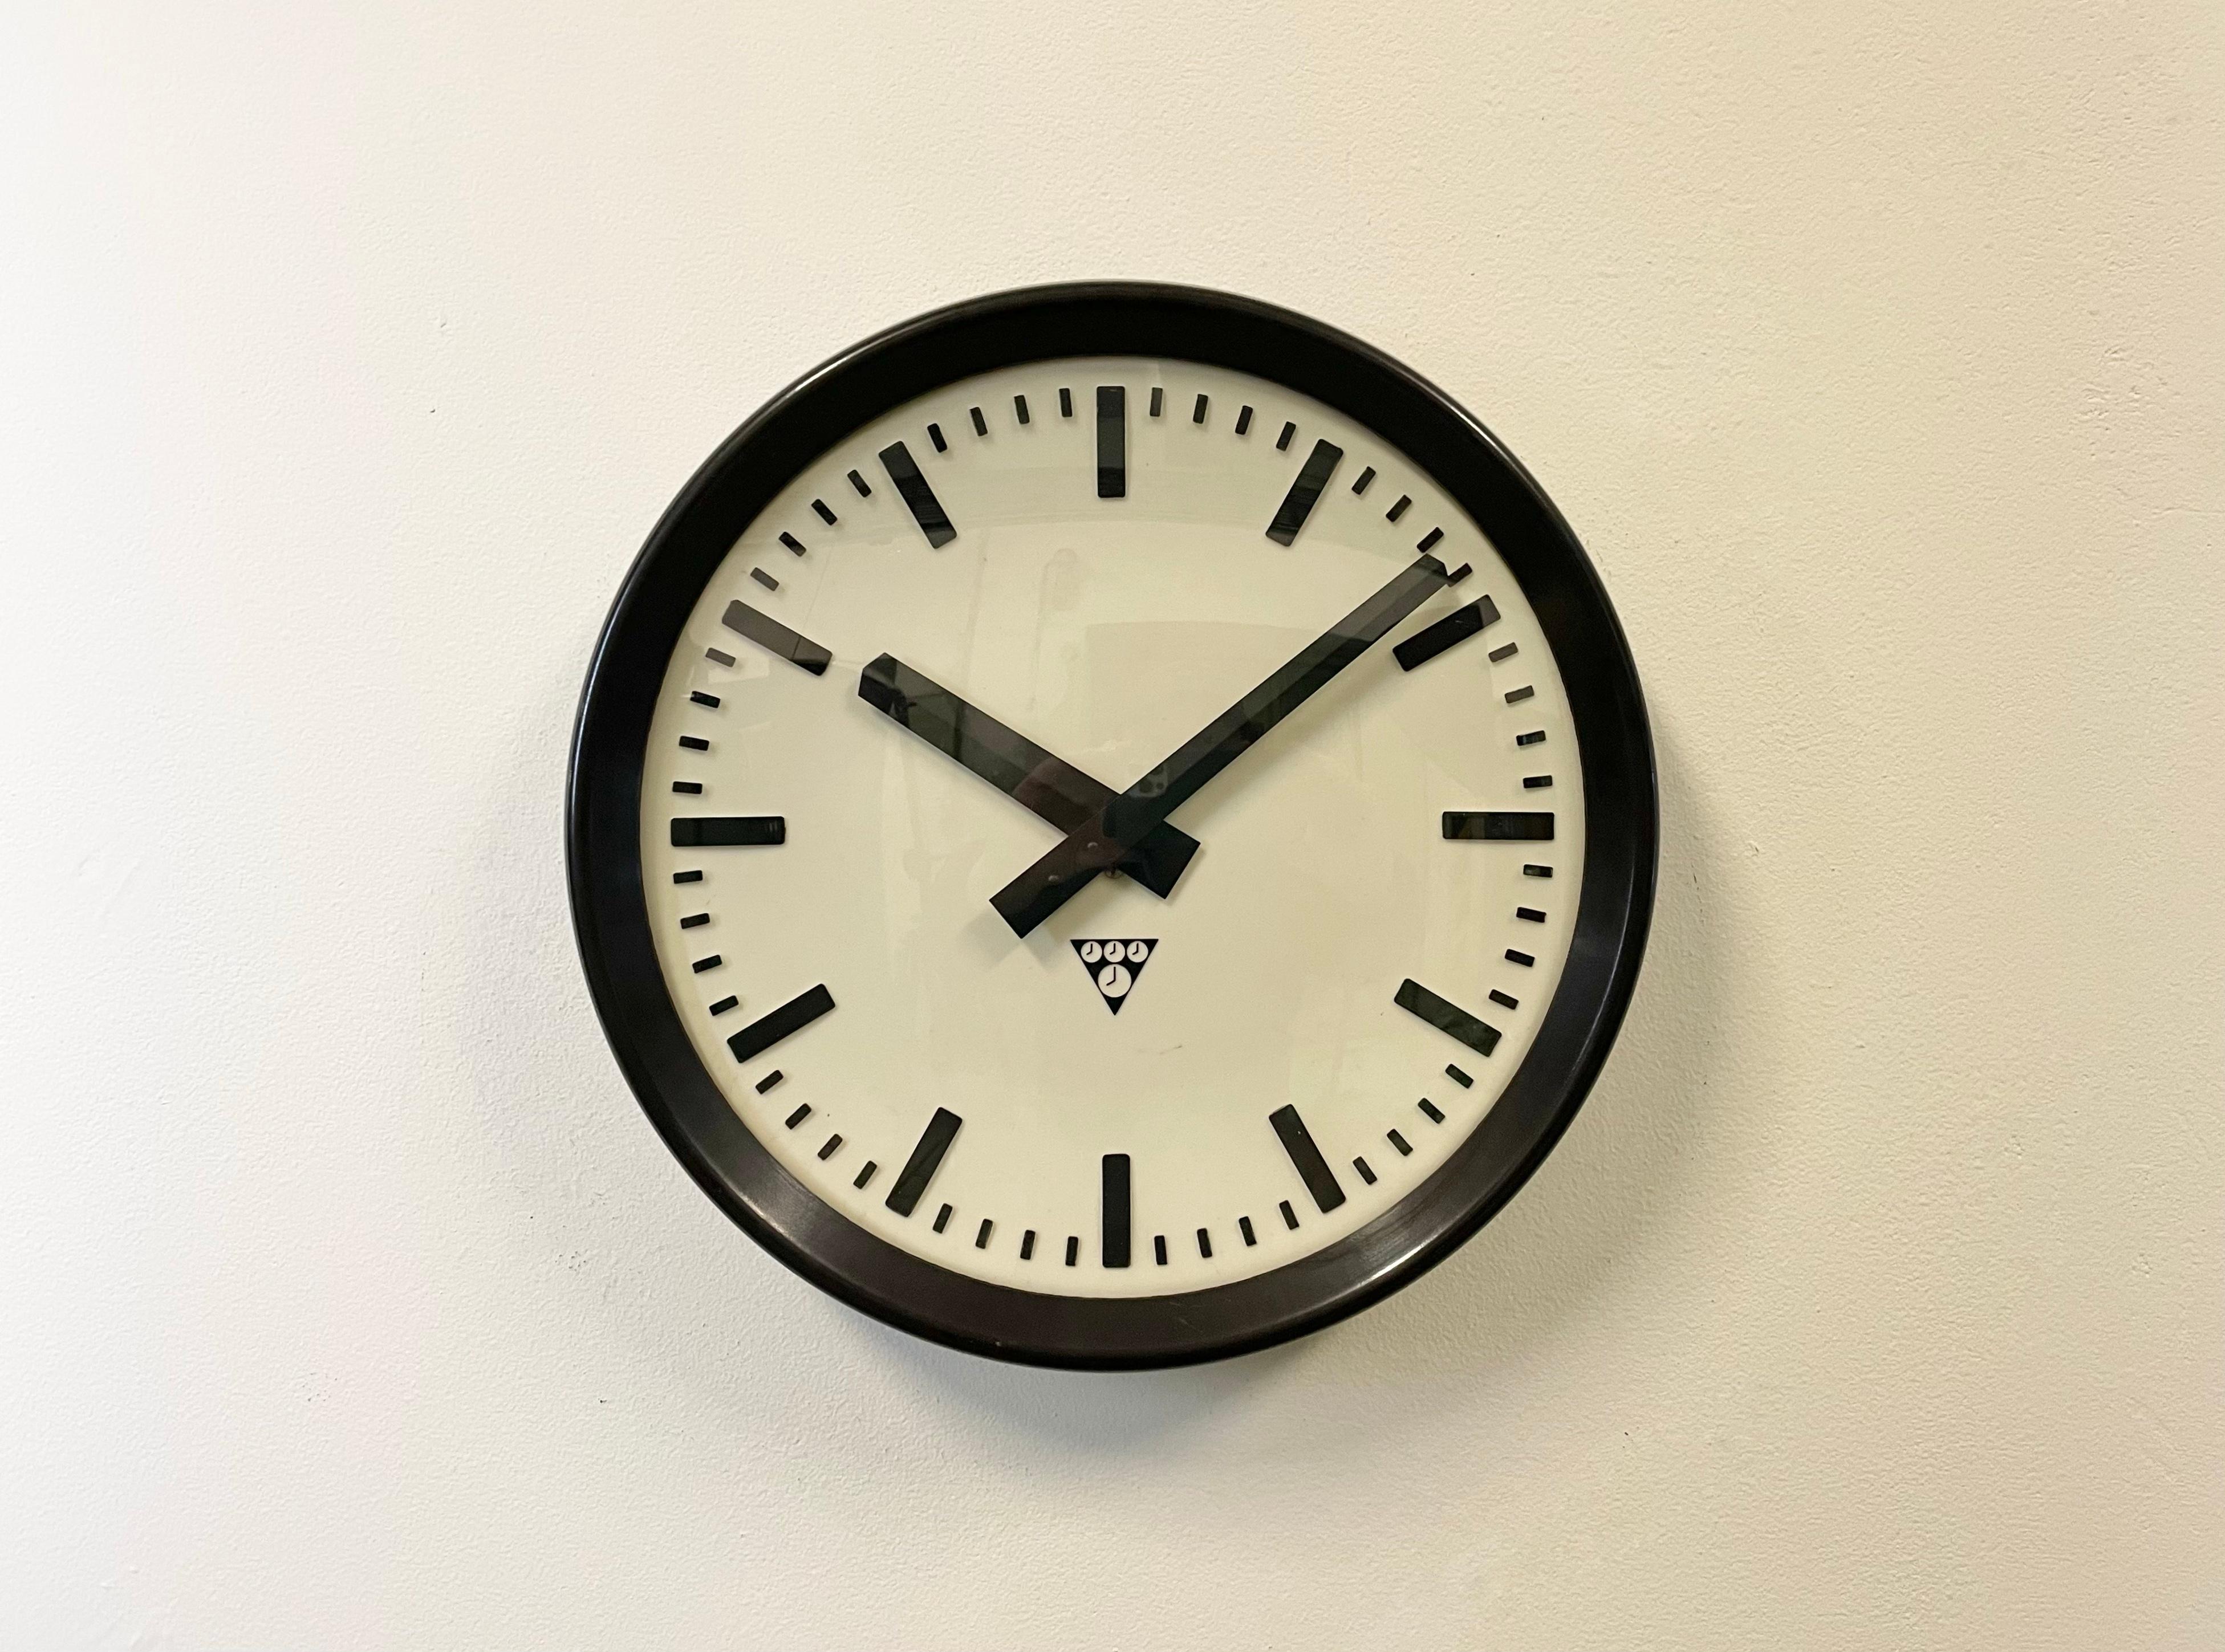 Wall clock produced by Pragotron in former Czechoslovakia during the 1960s. It features a brown bakelite frame, a white bakelite dial, an aluminium hands and a curved clear glass cover. The piece has been converted into a battery-powered clockwork